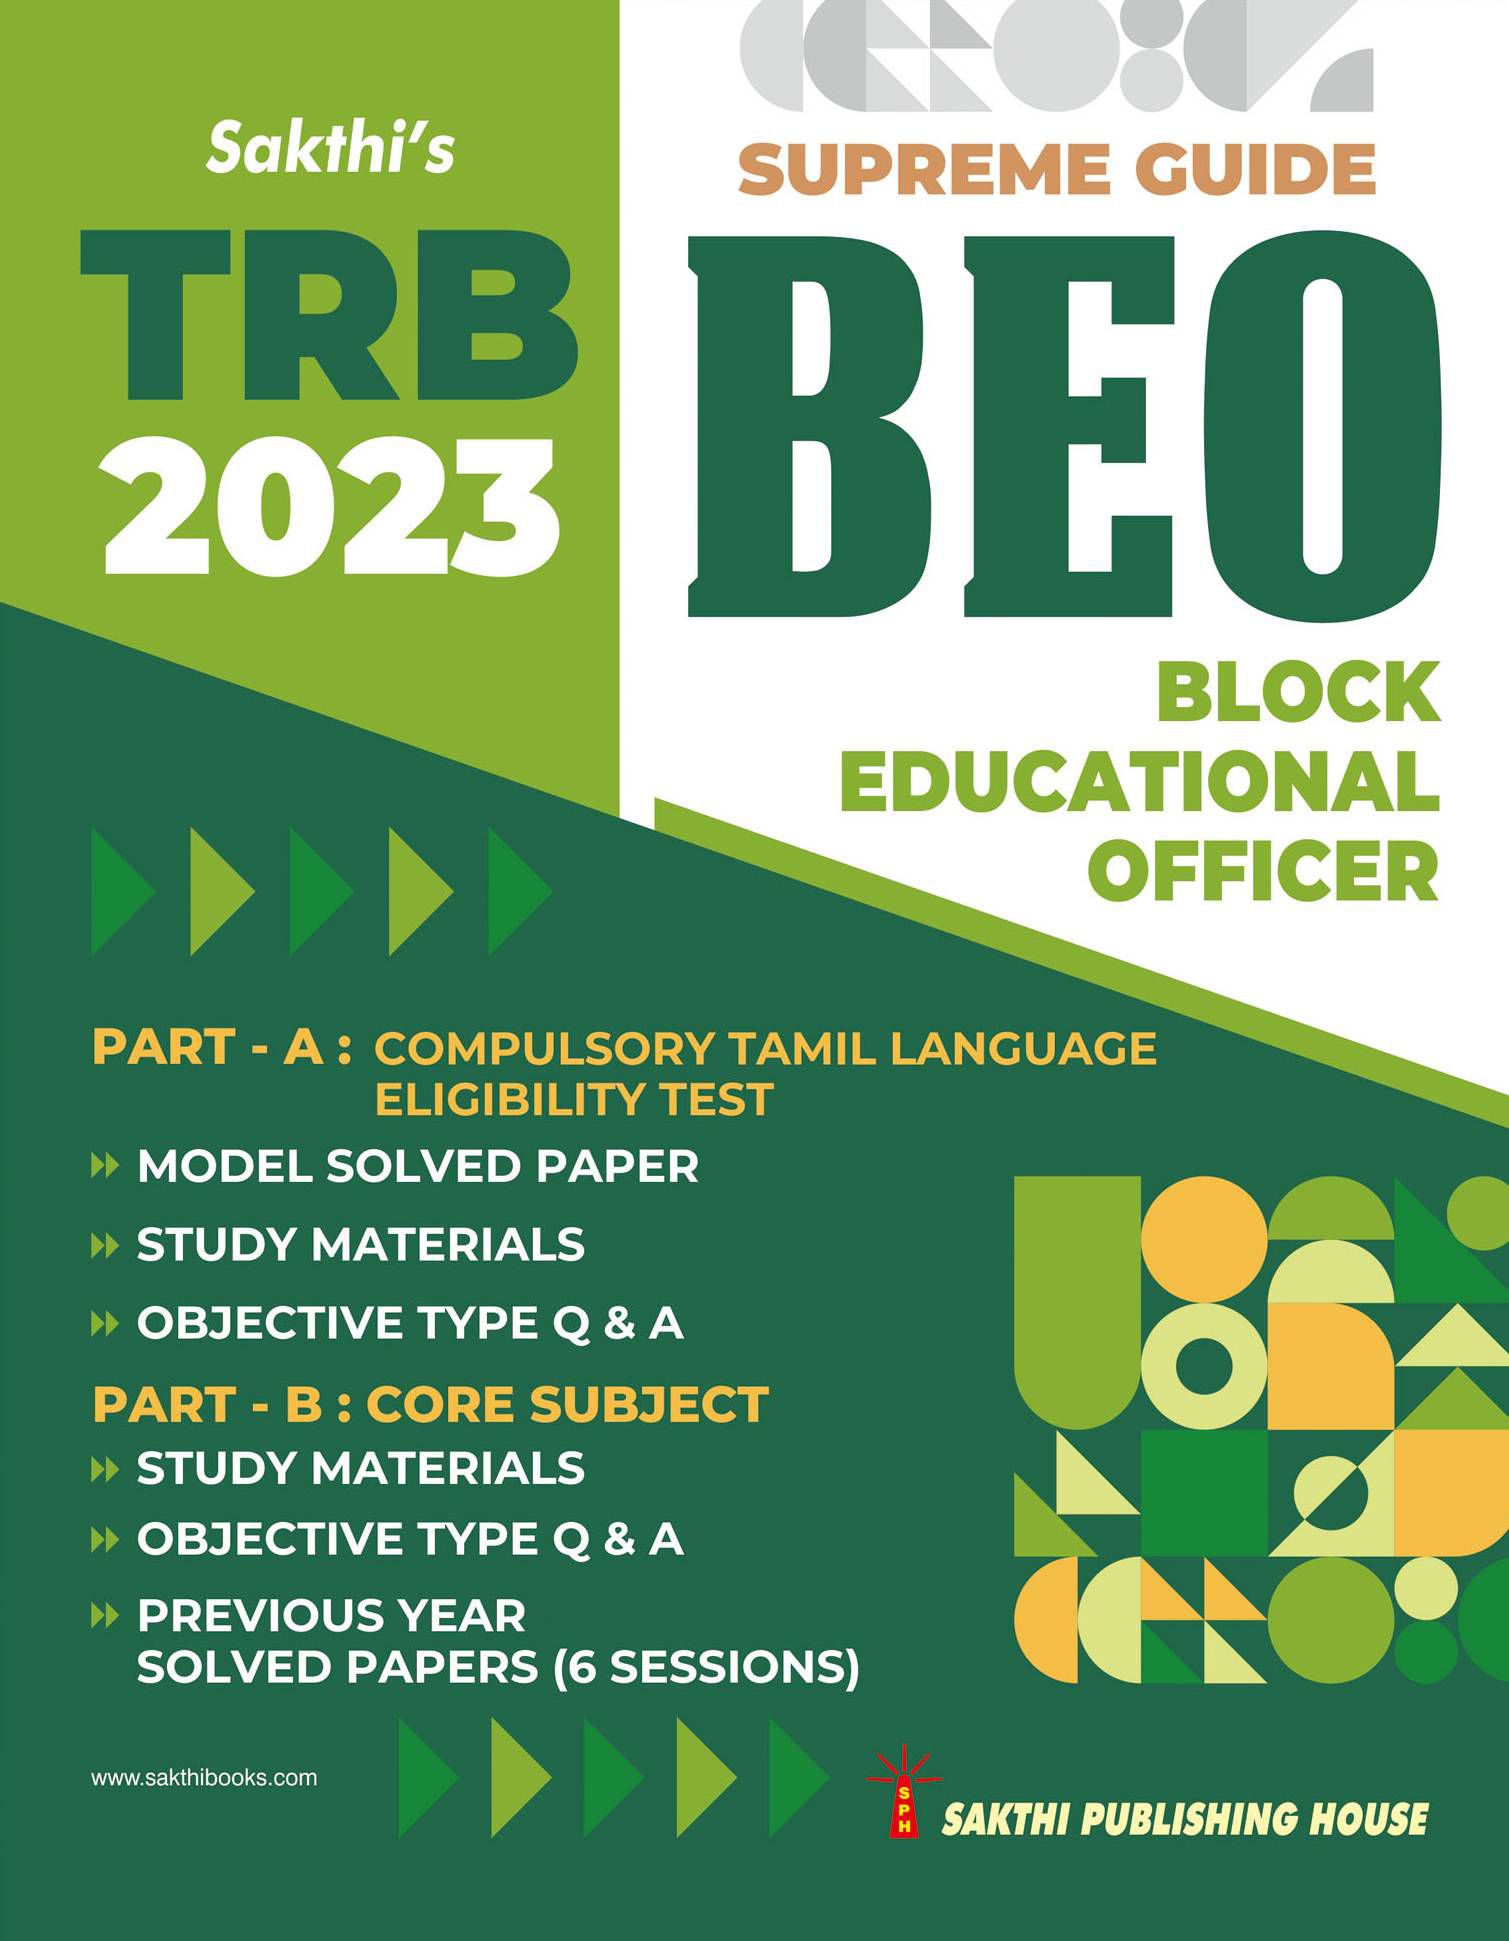     			TRB BEO (Block Educational Officer) Exam Study Materials & Objective Type Q&A